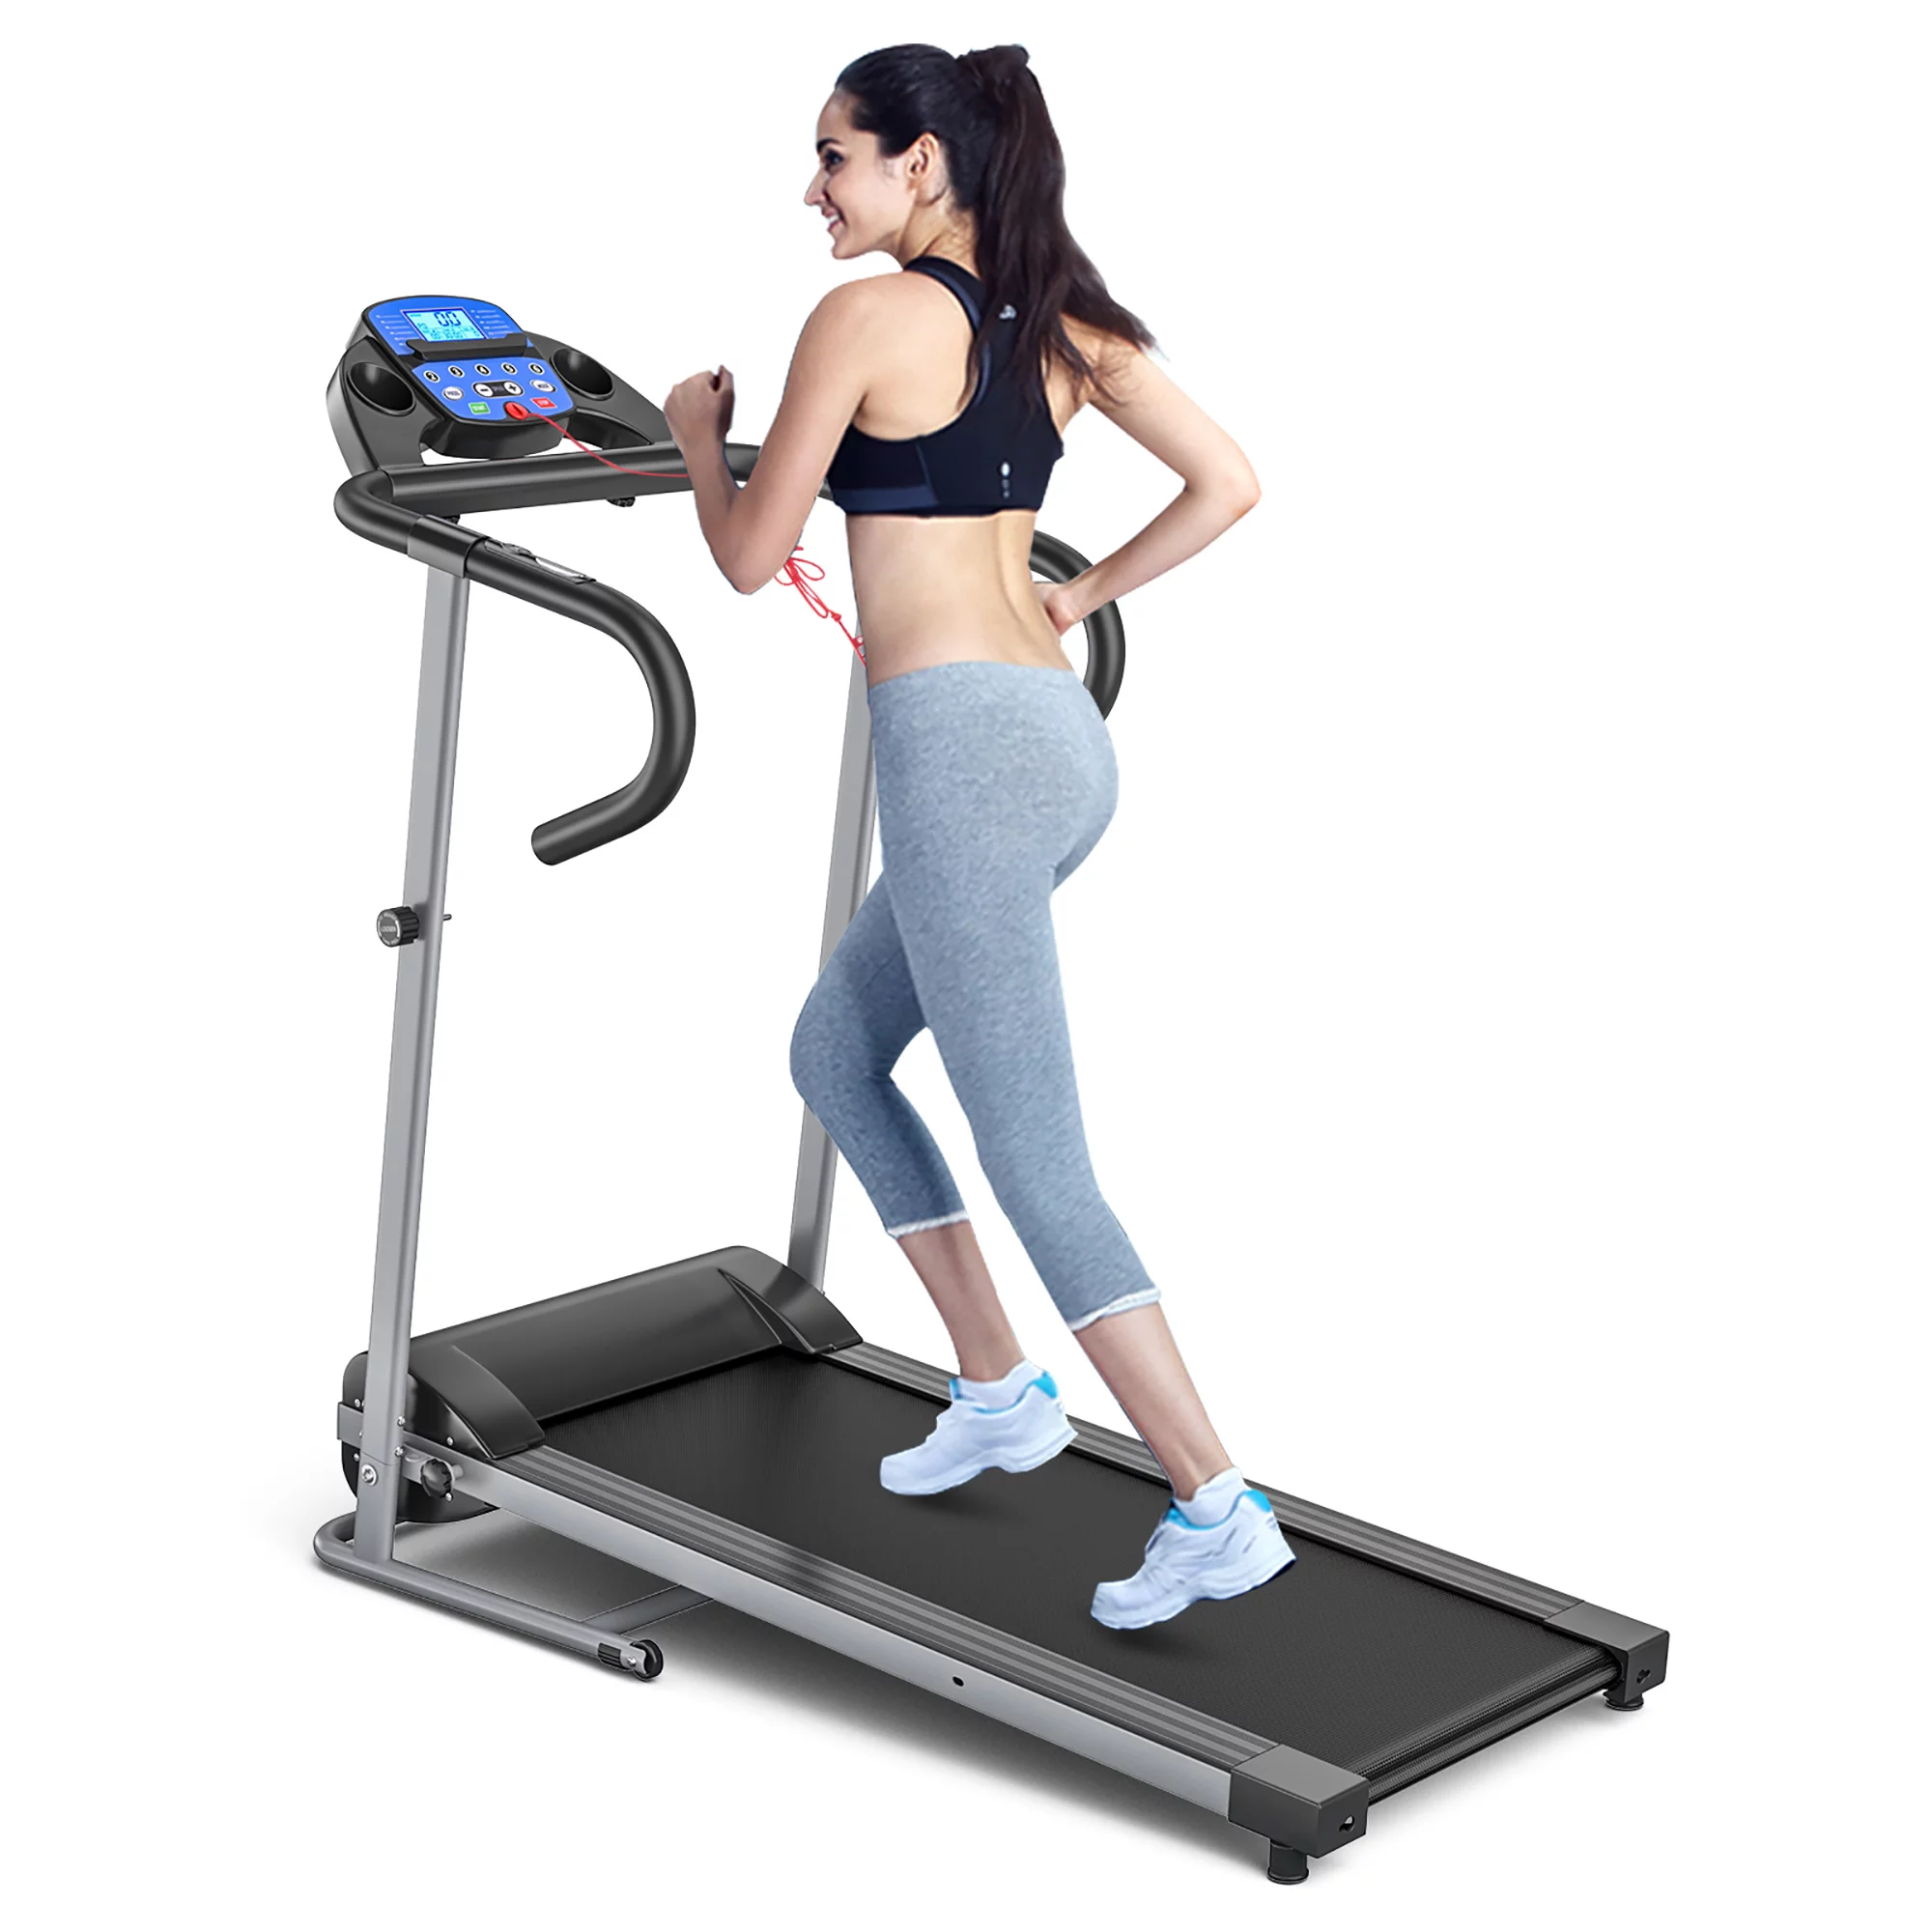 The Goplus 1100W Folding Treadmill with Electric Support and Motorized Power Running Fitness Machine is currently available at Walmart for $299, down from its original price of $578. This treadmill is equipped with a powerful motor that supports speeds up to 10mph, making it ideal for runners of all levels. It also features a folding design that makes it easy to store when not in use. With a variety of built-in workout programs and adjustable speed settings, the Goplus 1100W Folding Treadmill is a great choice for anyone looking to improve their fitness at home. 